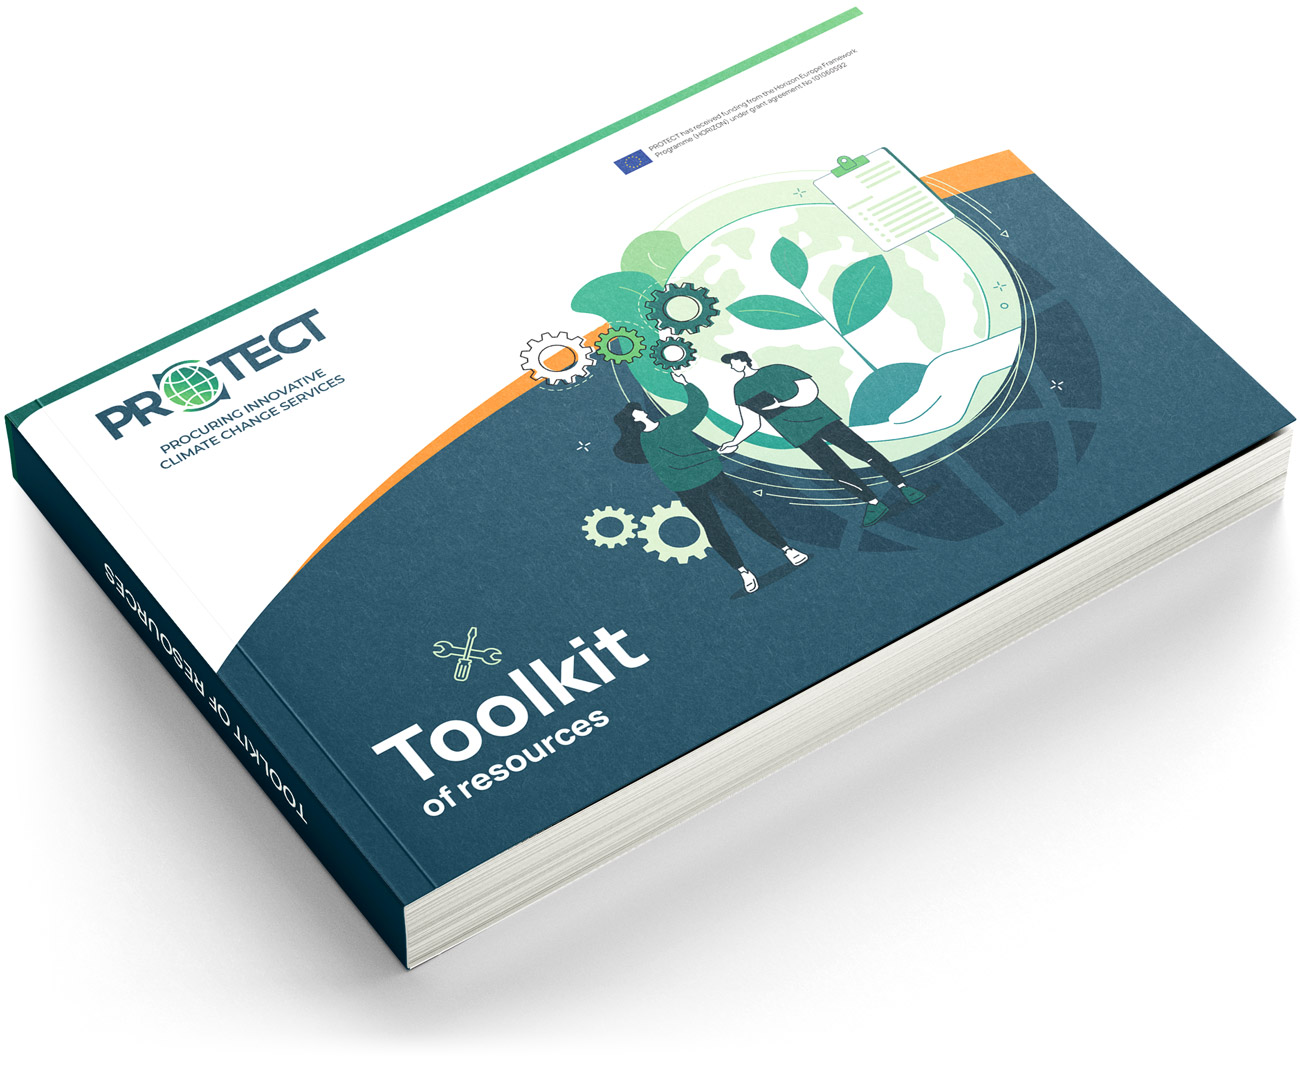 PROTECT Toolkit of Resources